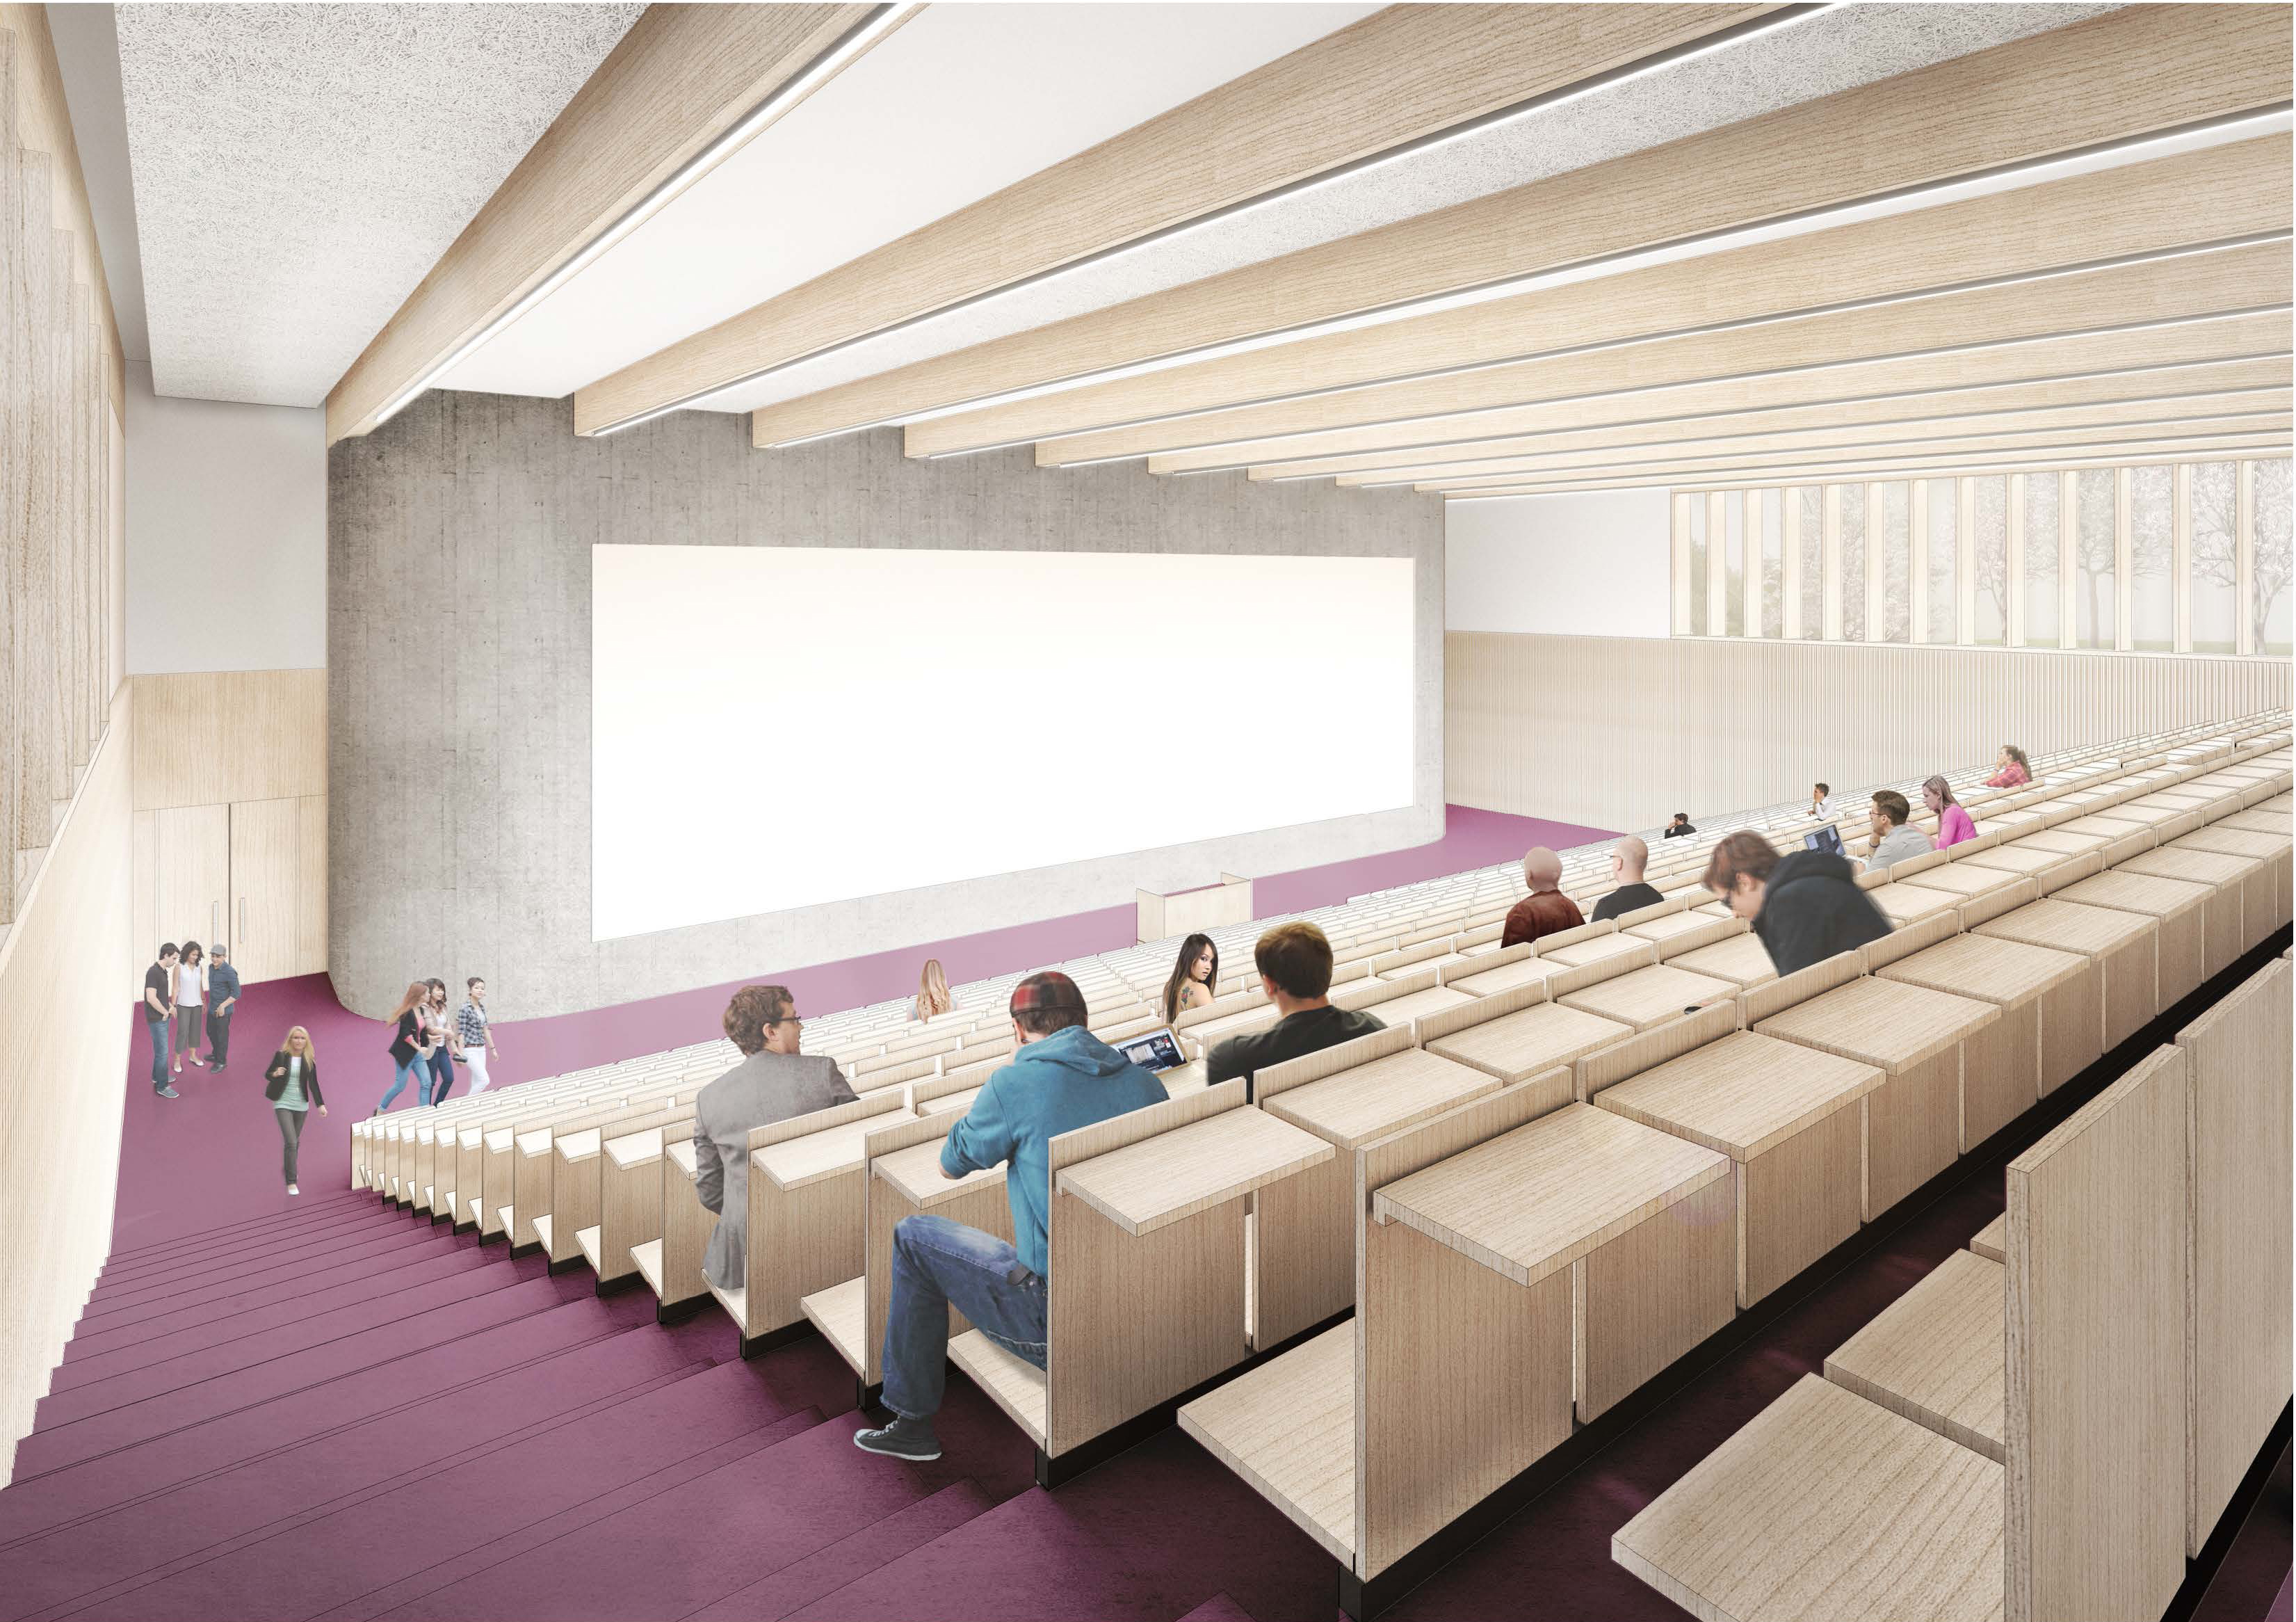 Digital Visualization of the lecture hall